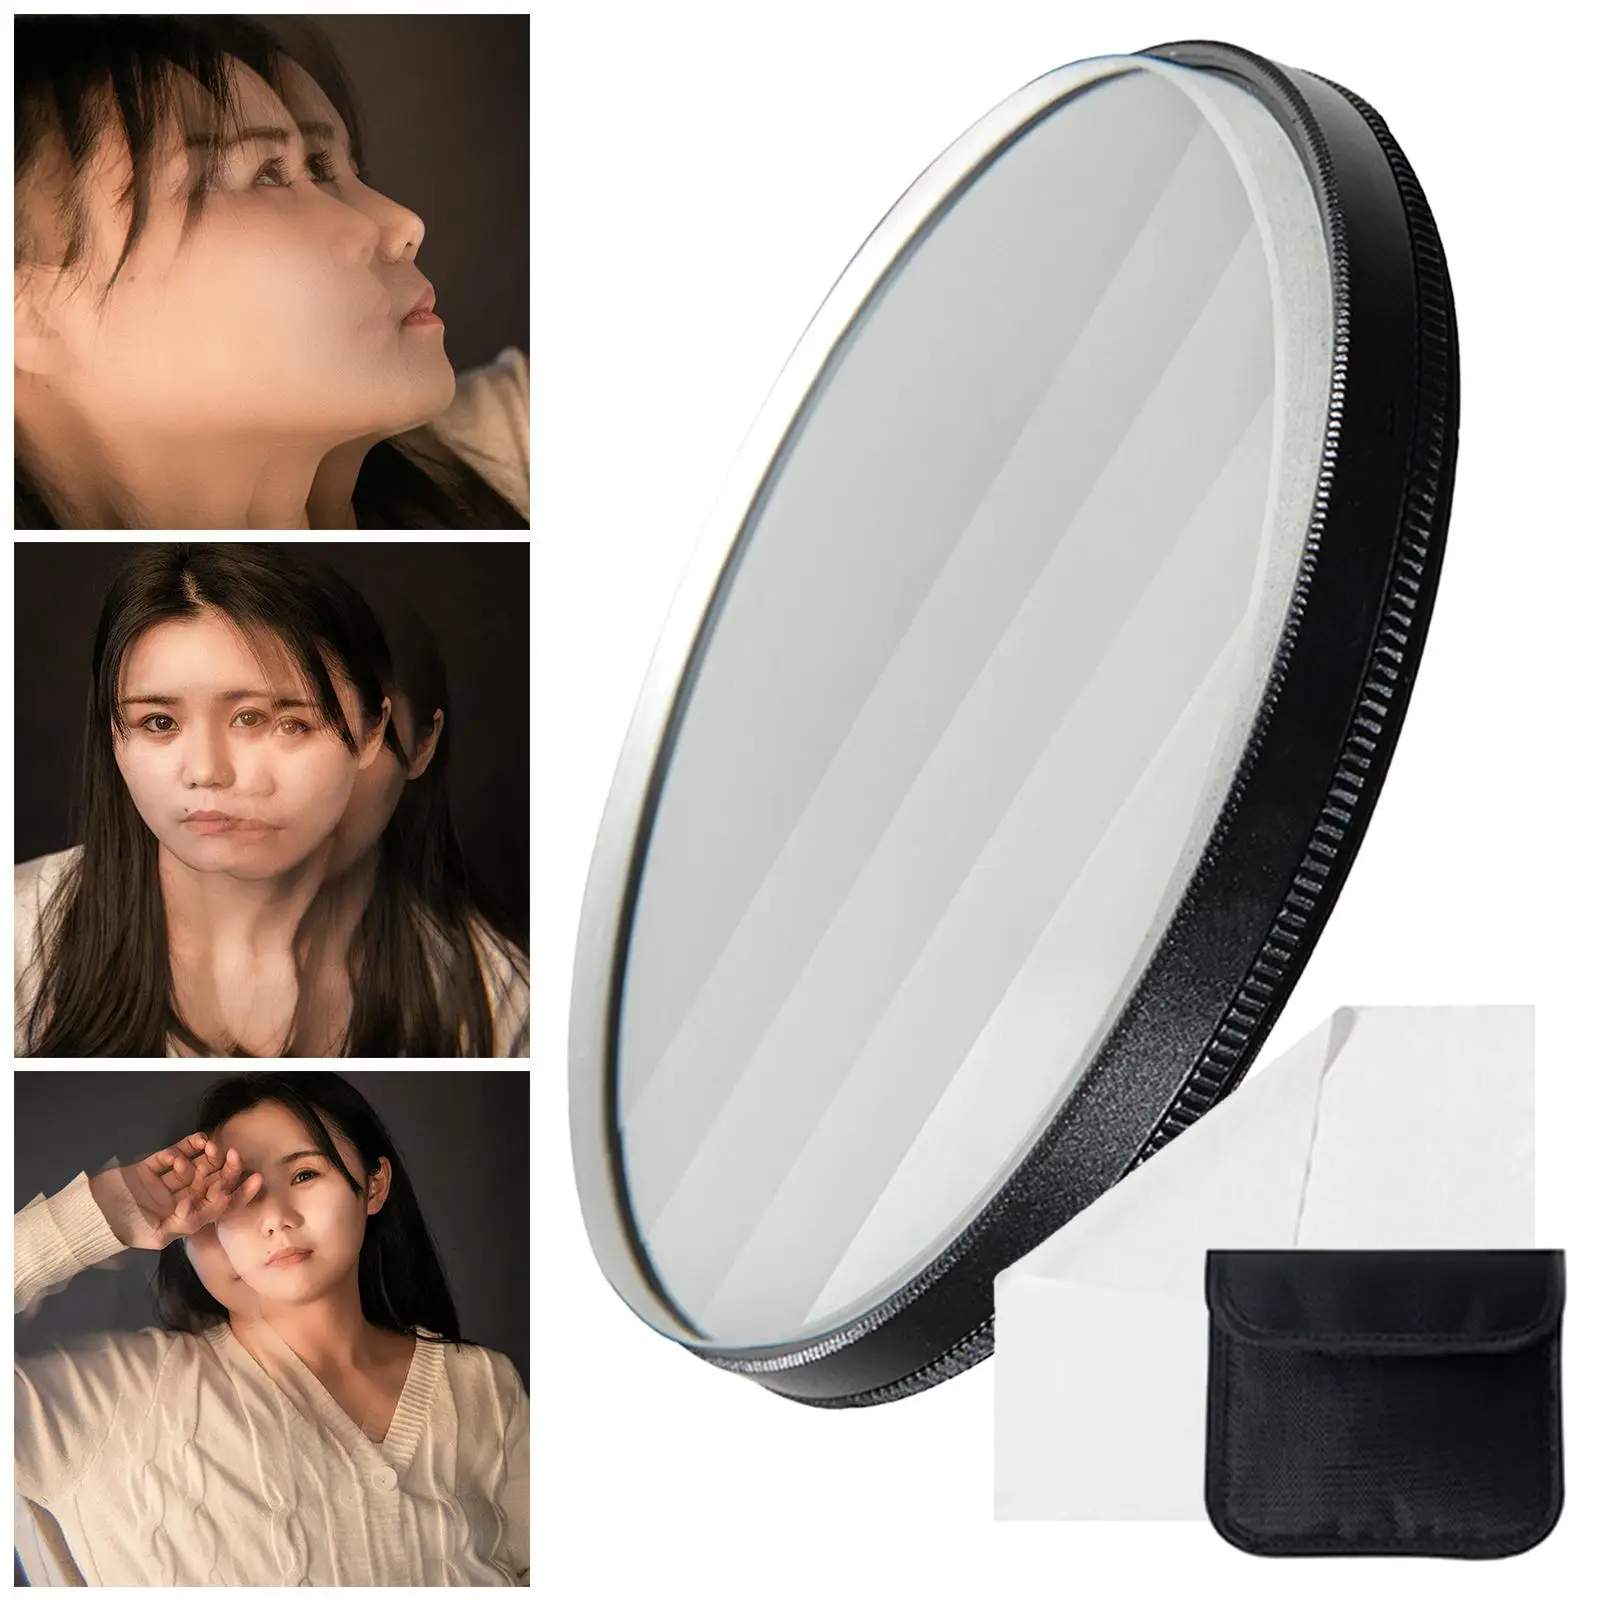 Linear Glass  Lens Filter, Main Object Creative Multiple Refraction for Slr Photography